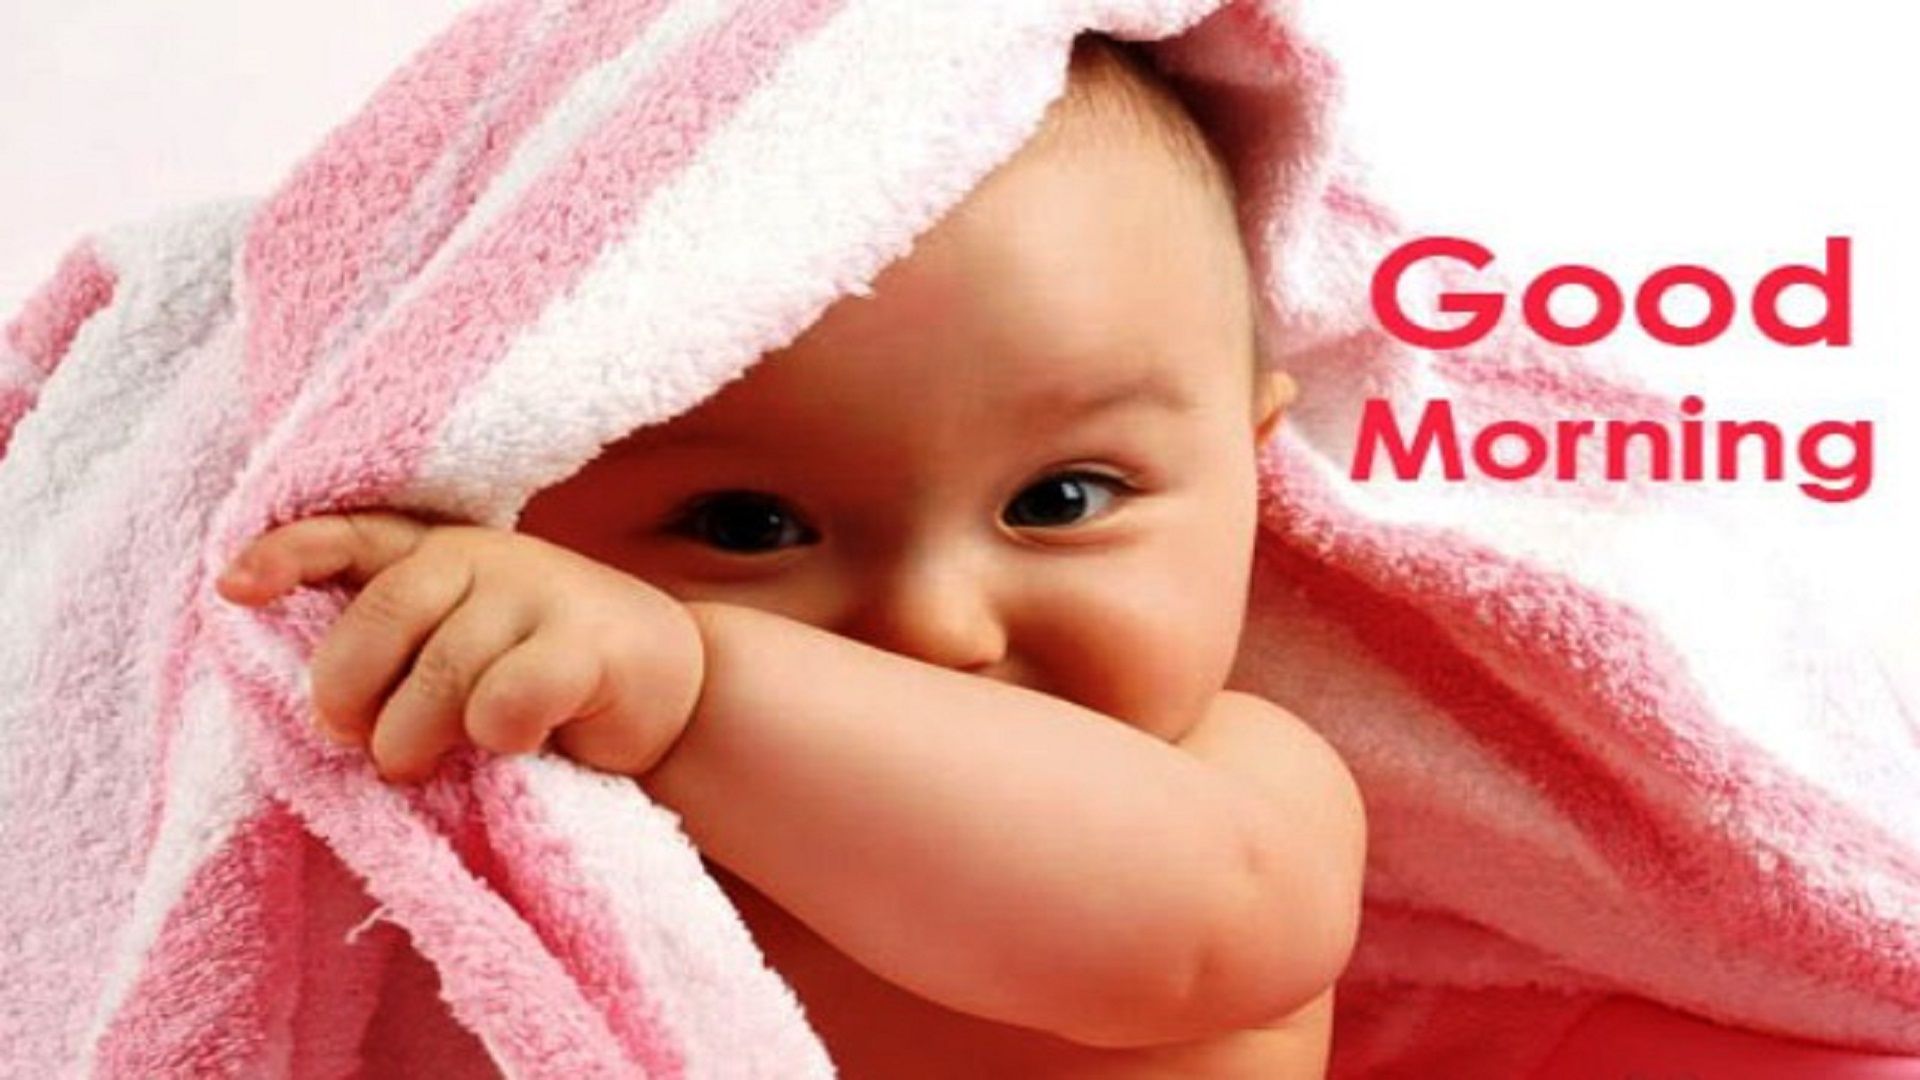 Good Morning Baby Images with Quotes for Whatsapp - Good Morning